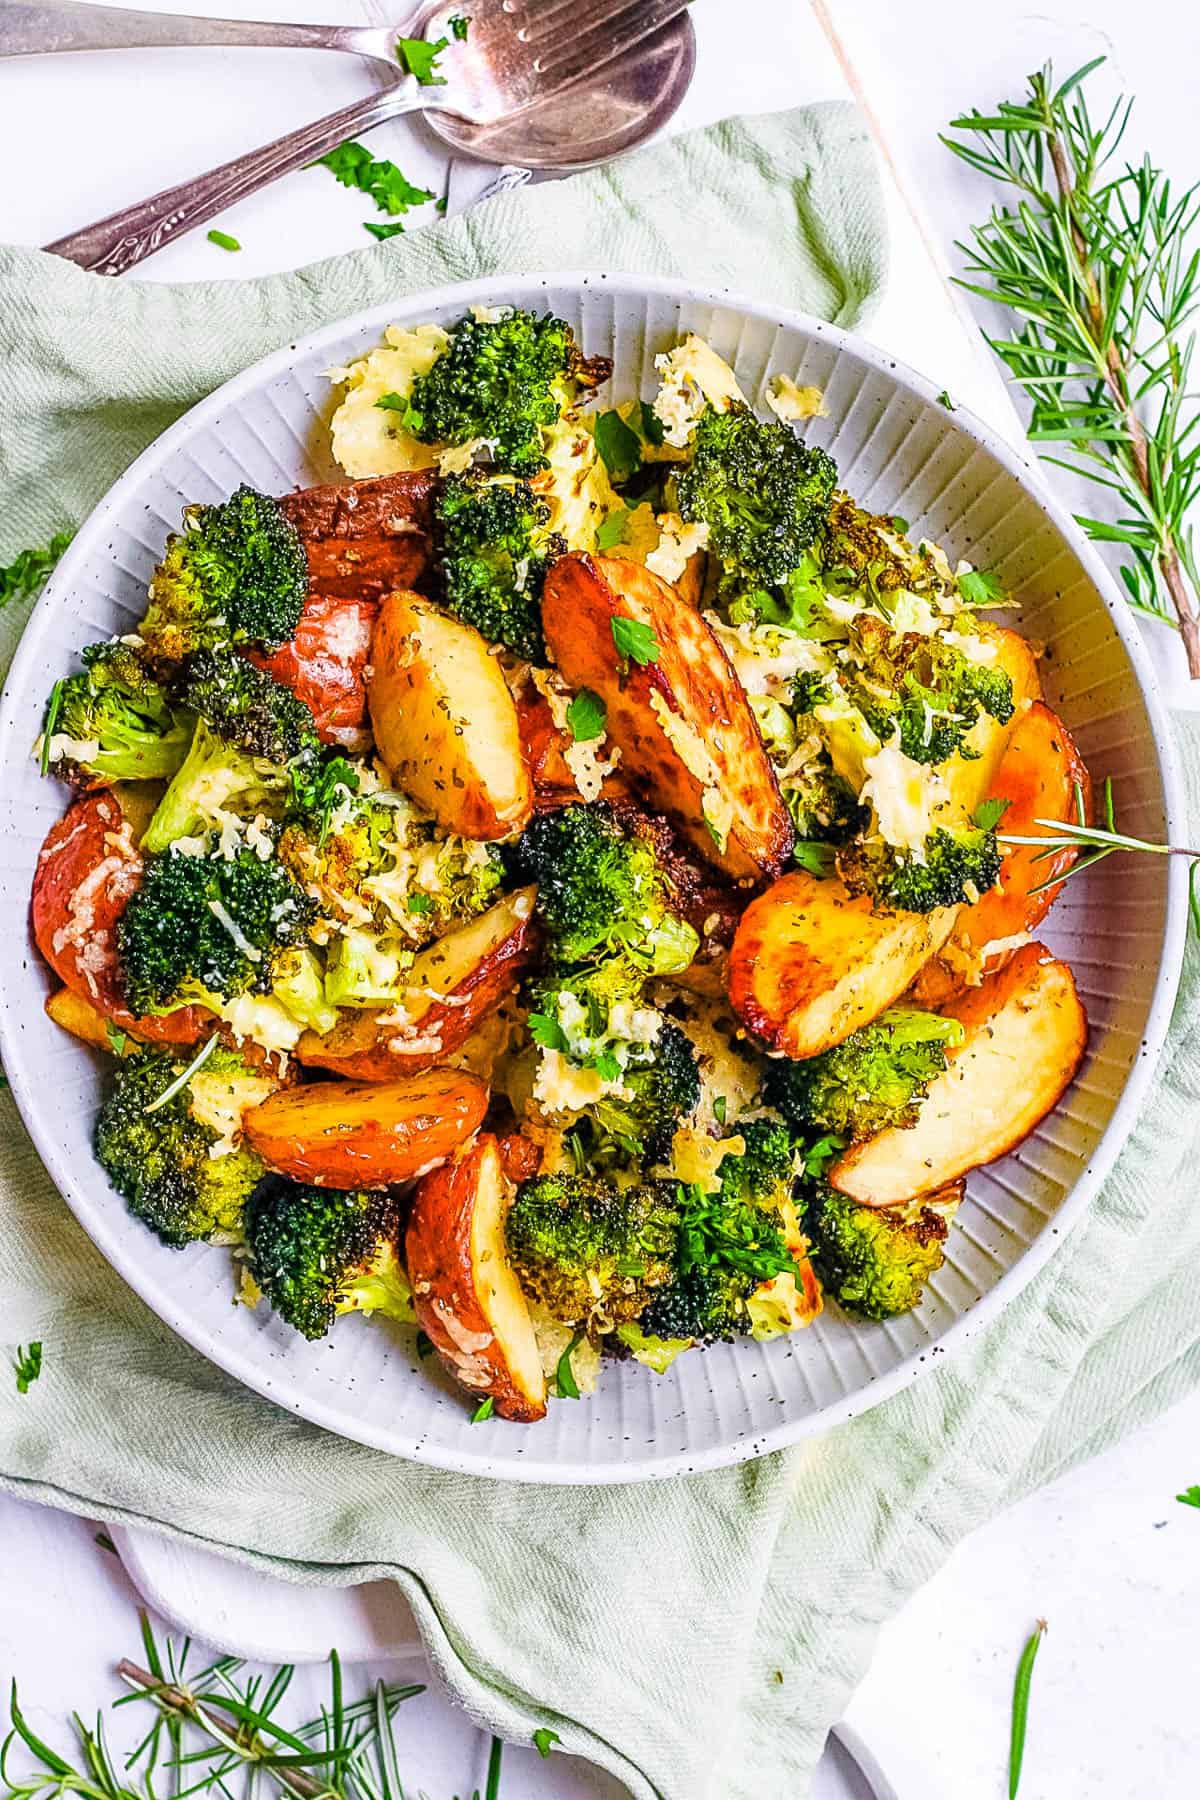 Oven roasted broccoli and potatoes with parmesan and garlic in a serving bowl.